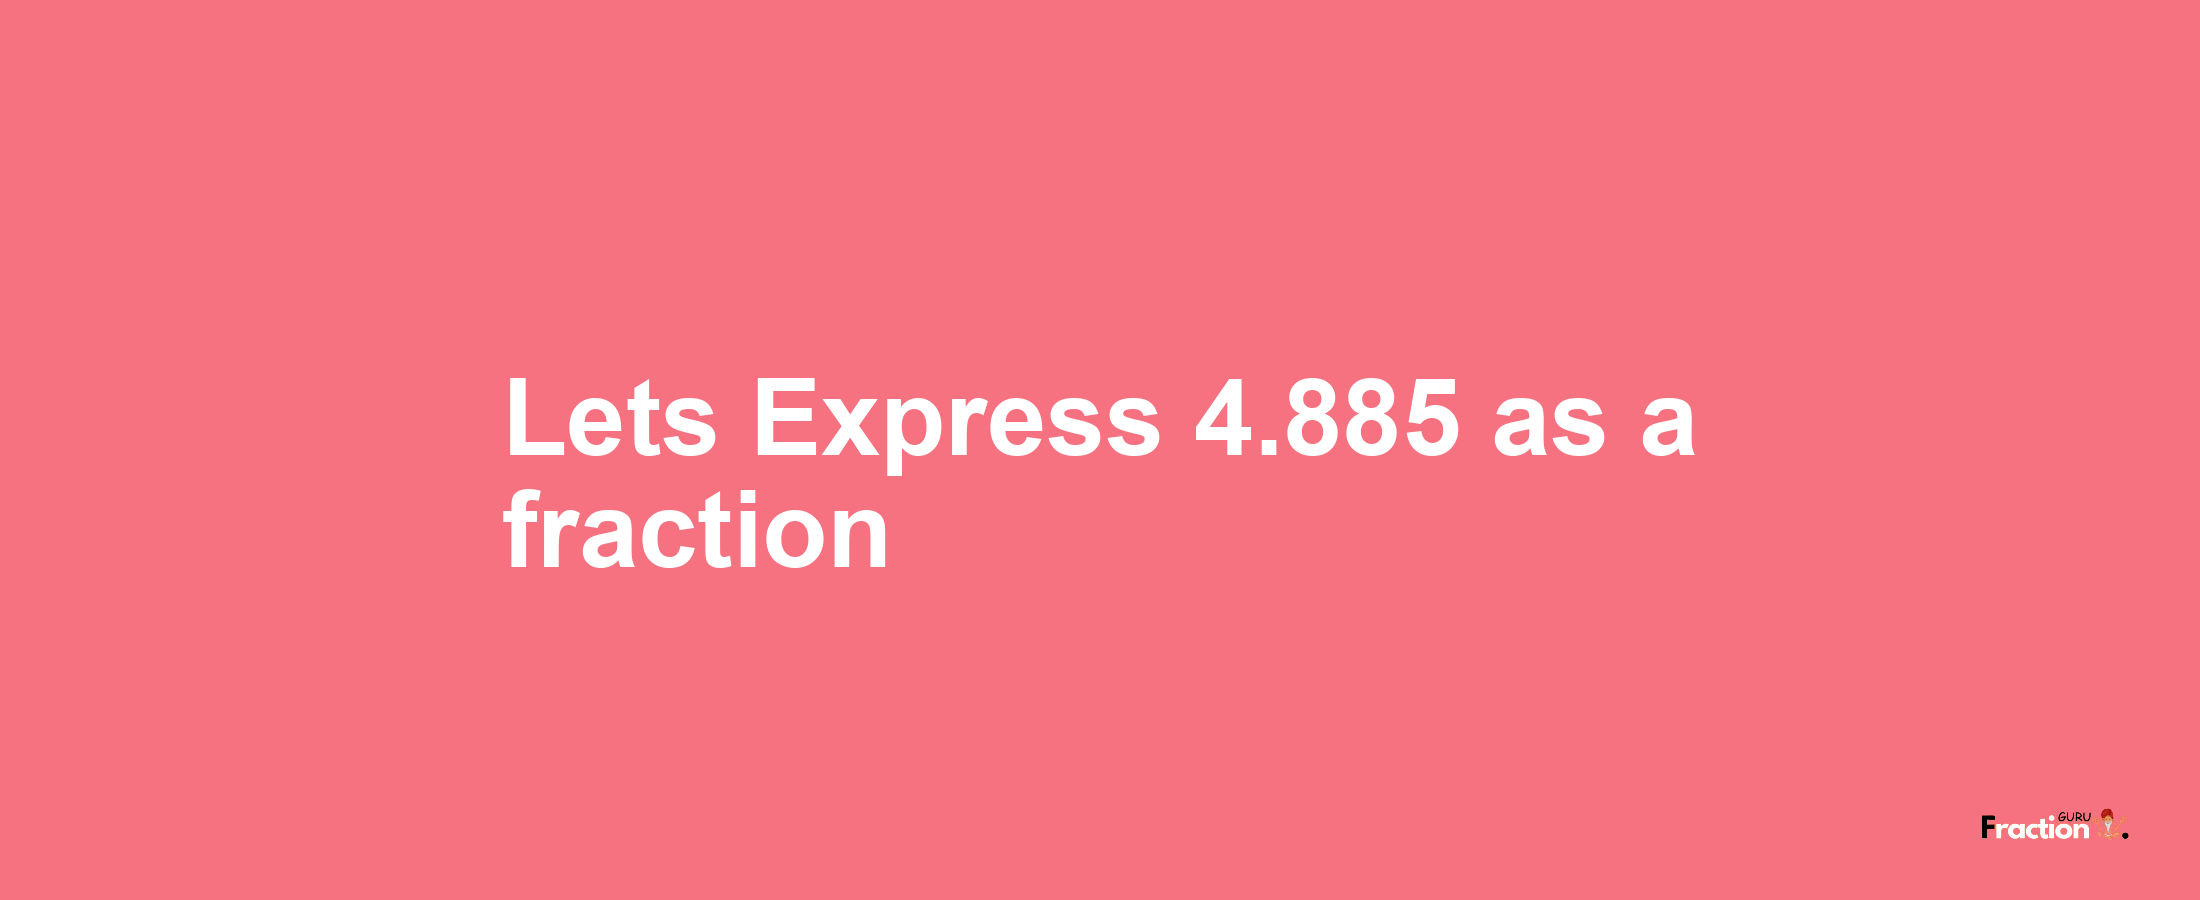 Lets Express 4.885 as afraction